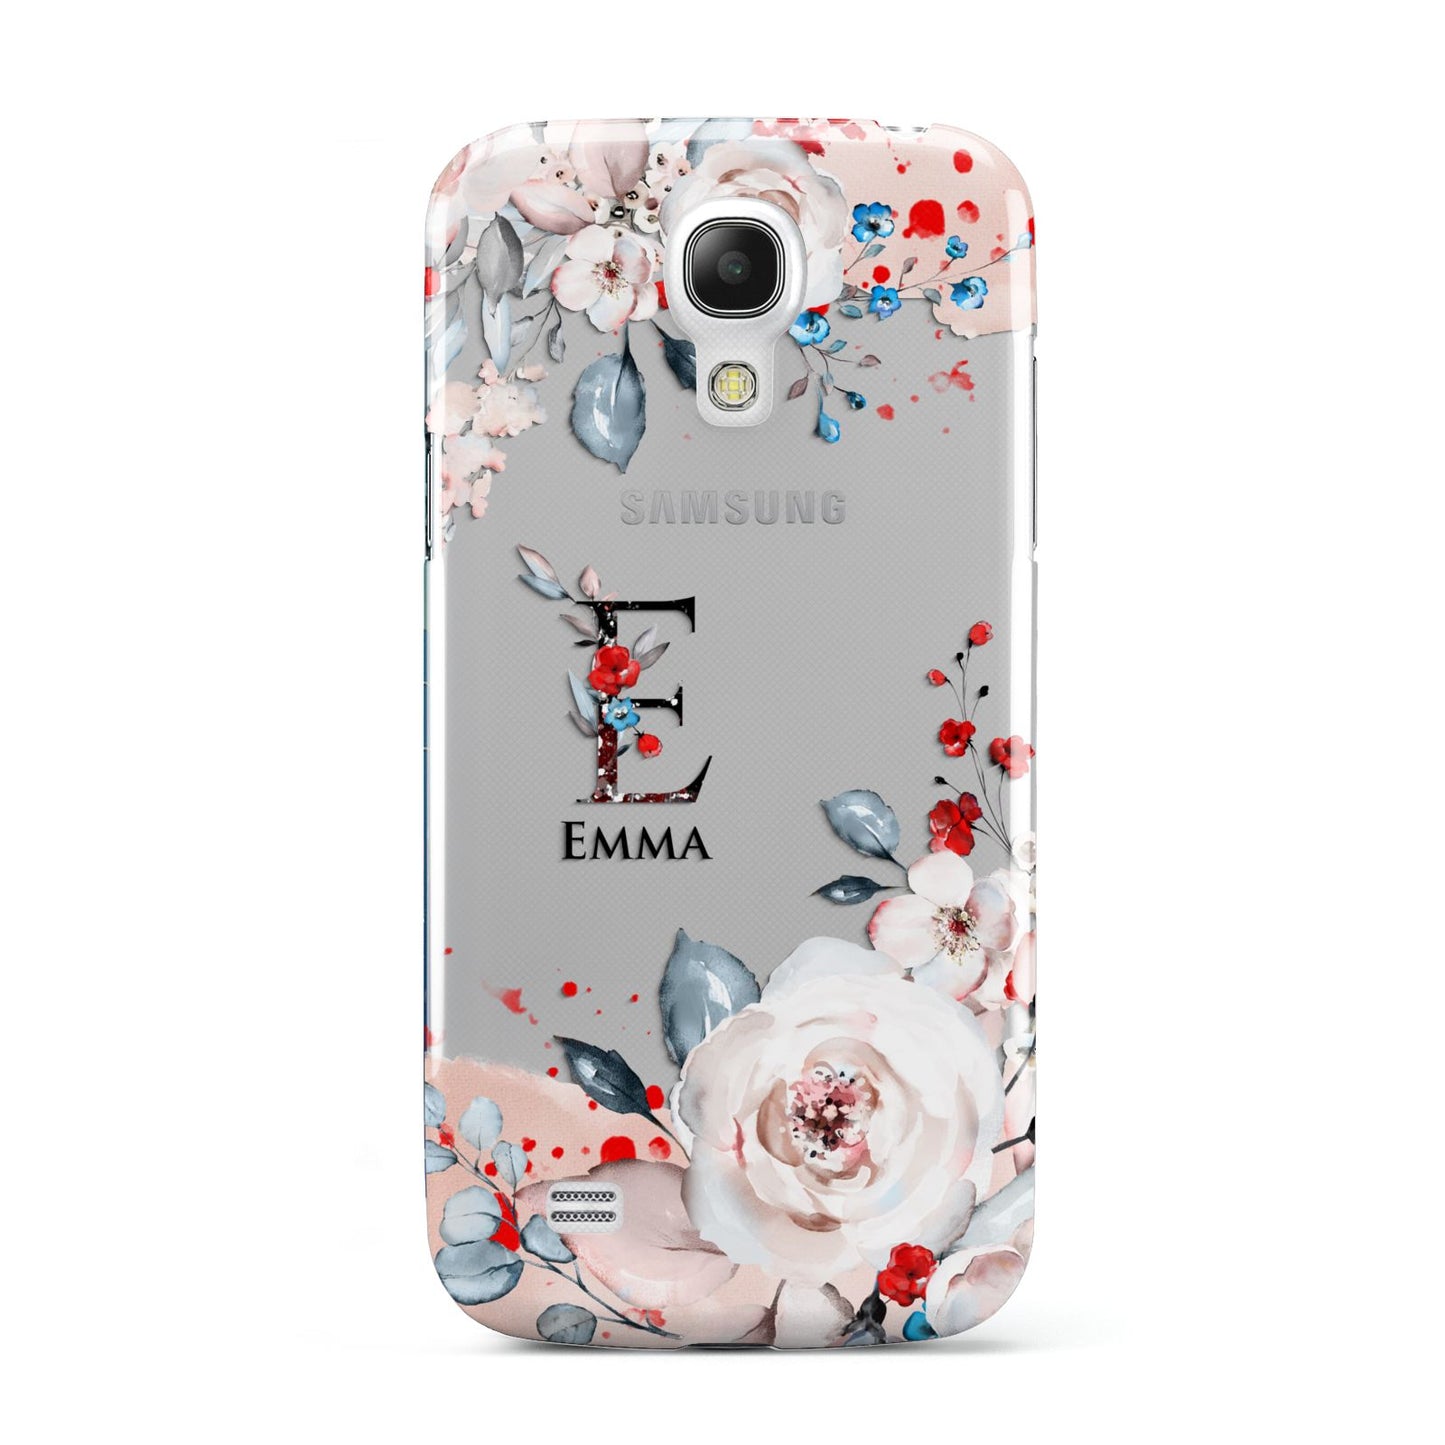 Monogrammed Roses Floral Wreath Samsung Galaxy S4 Mini Case